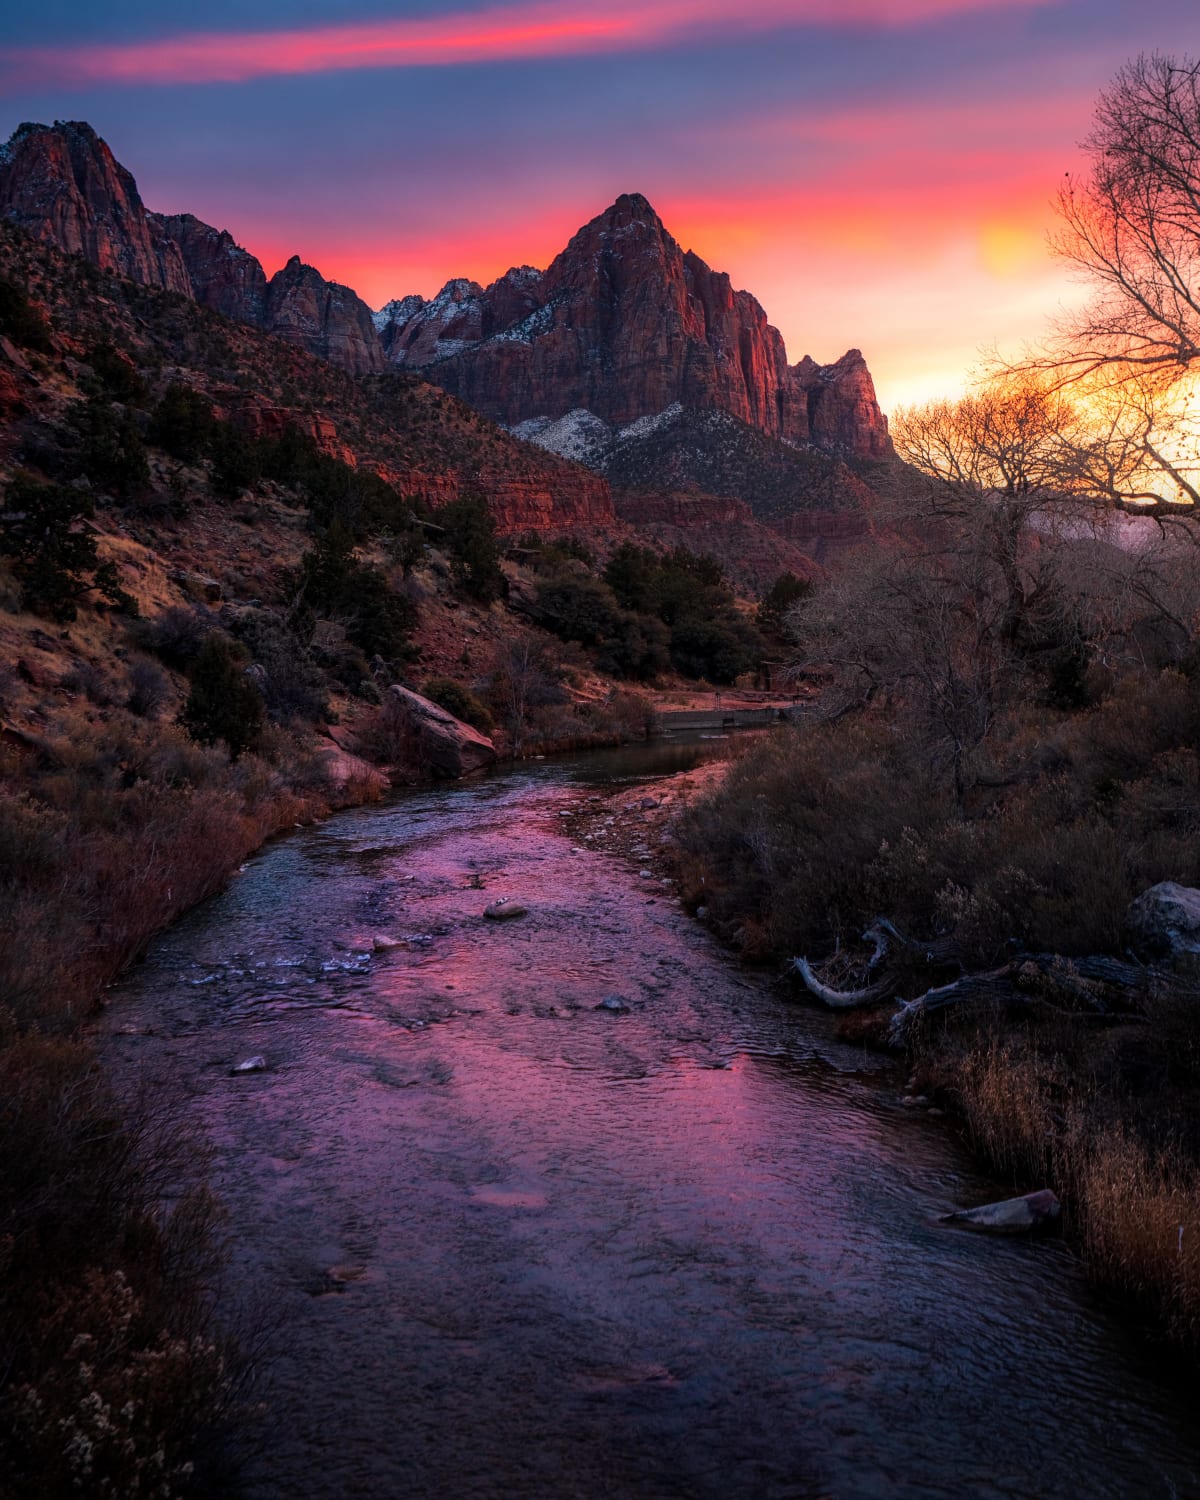 ITAP of a sunset at Zion National park.